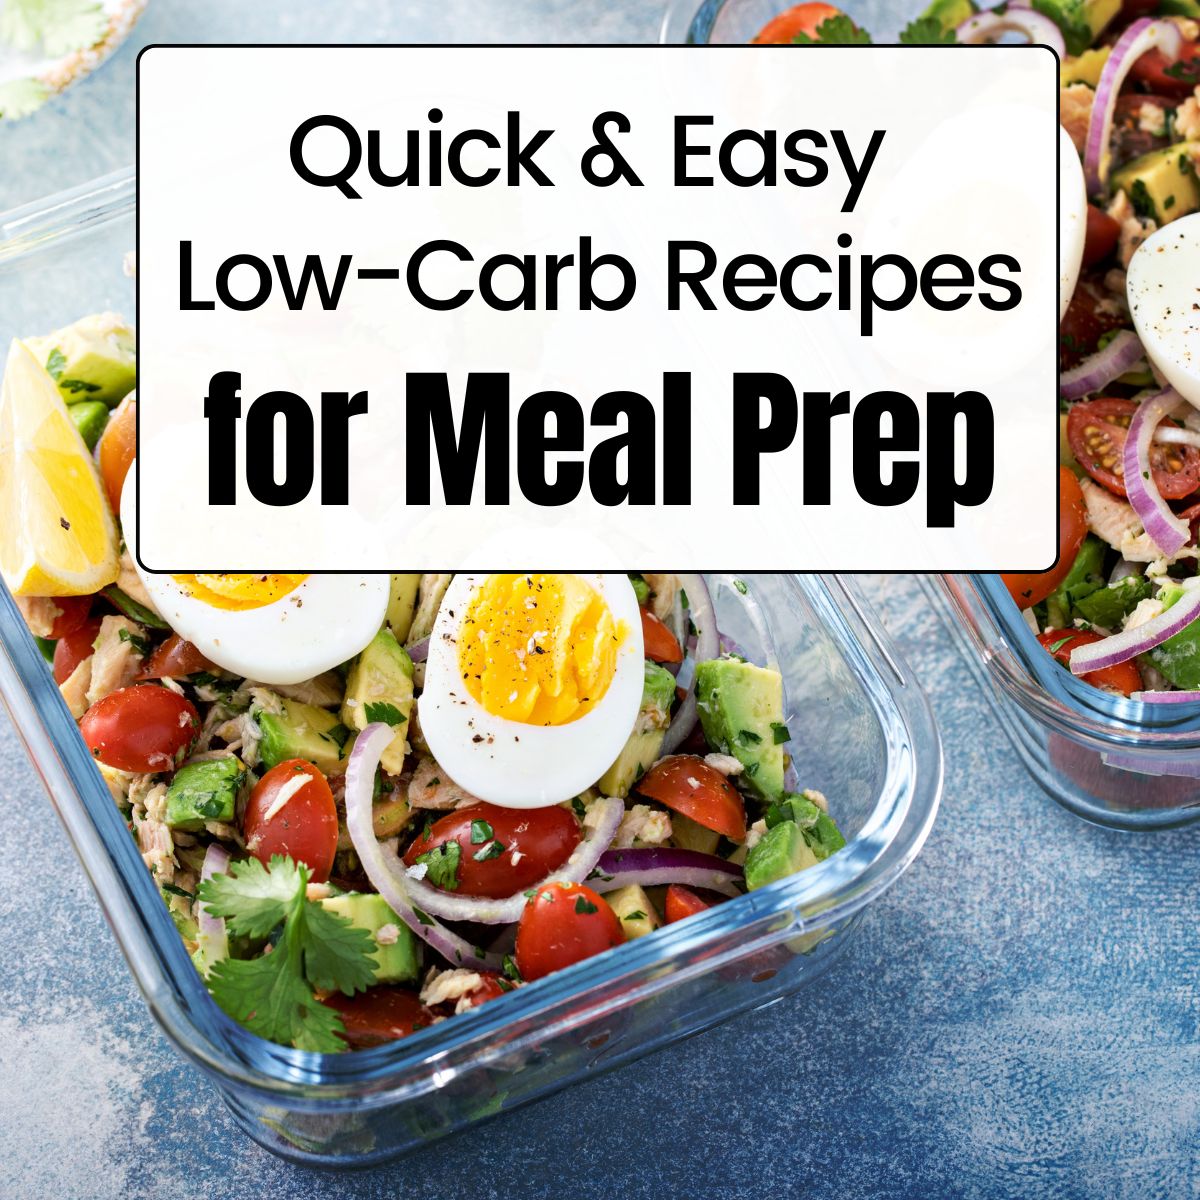 Glass container with colorful low-carb meal prep salad featuring boiled eggs, cherry tomatoes, avocado, and cilantro, with text overlay 'Quick & Easy Low-Carb Recipes for Meal Prep